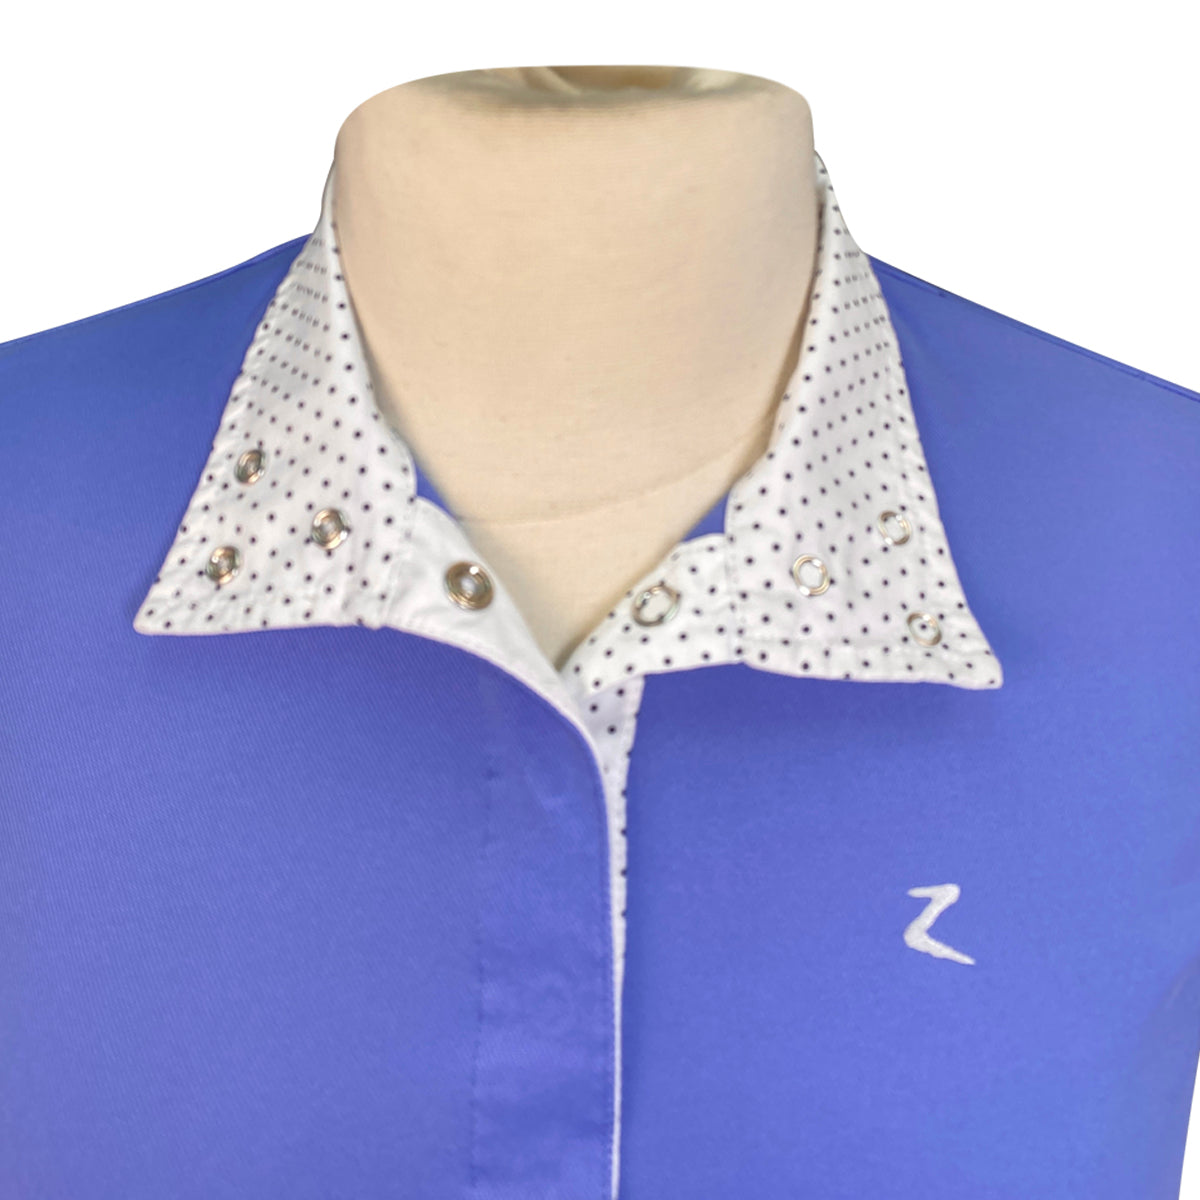 Horze 'Blaire' Short Sleeve Show Shirt in Periwinkle